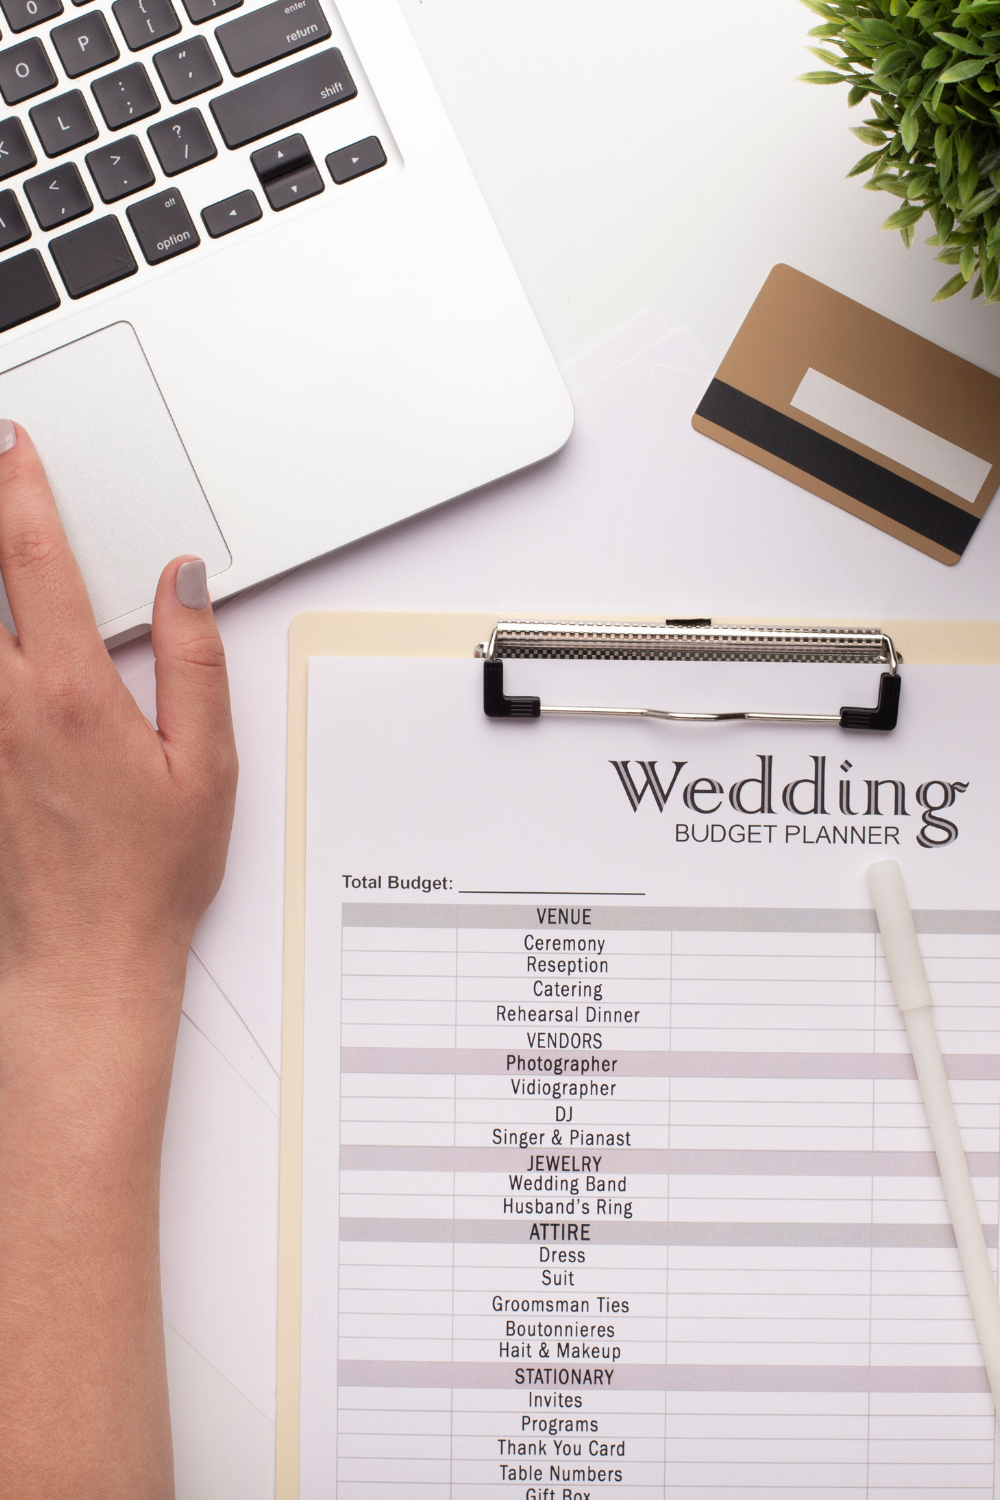 Happily Ever After Begins Here: Top Tips To Plan Your Wedding